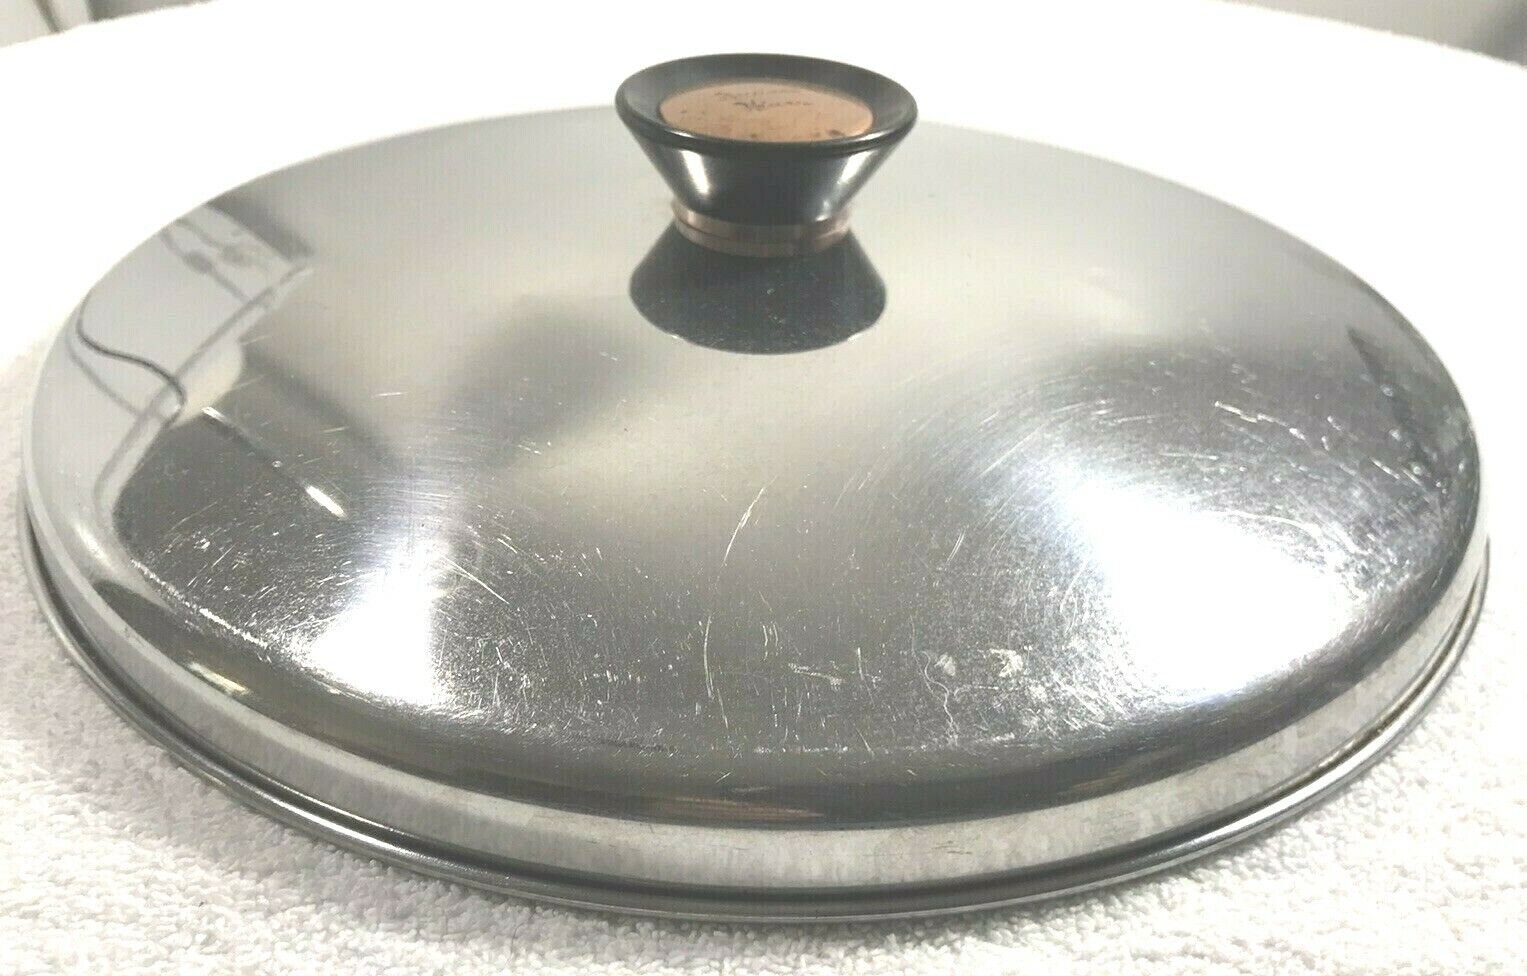 Ducan Hines Cooking Lid 11 3/8 Replacement